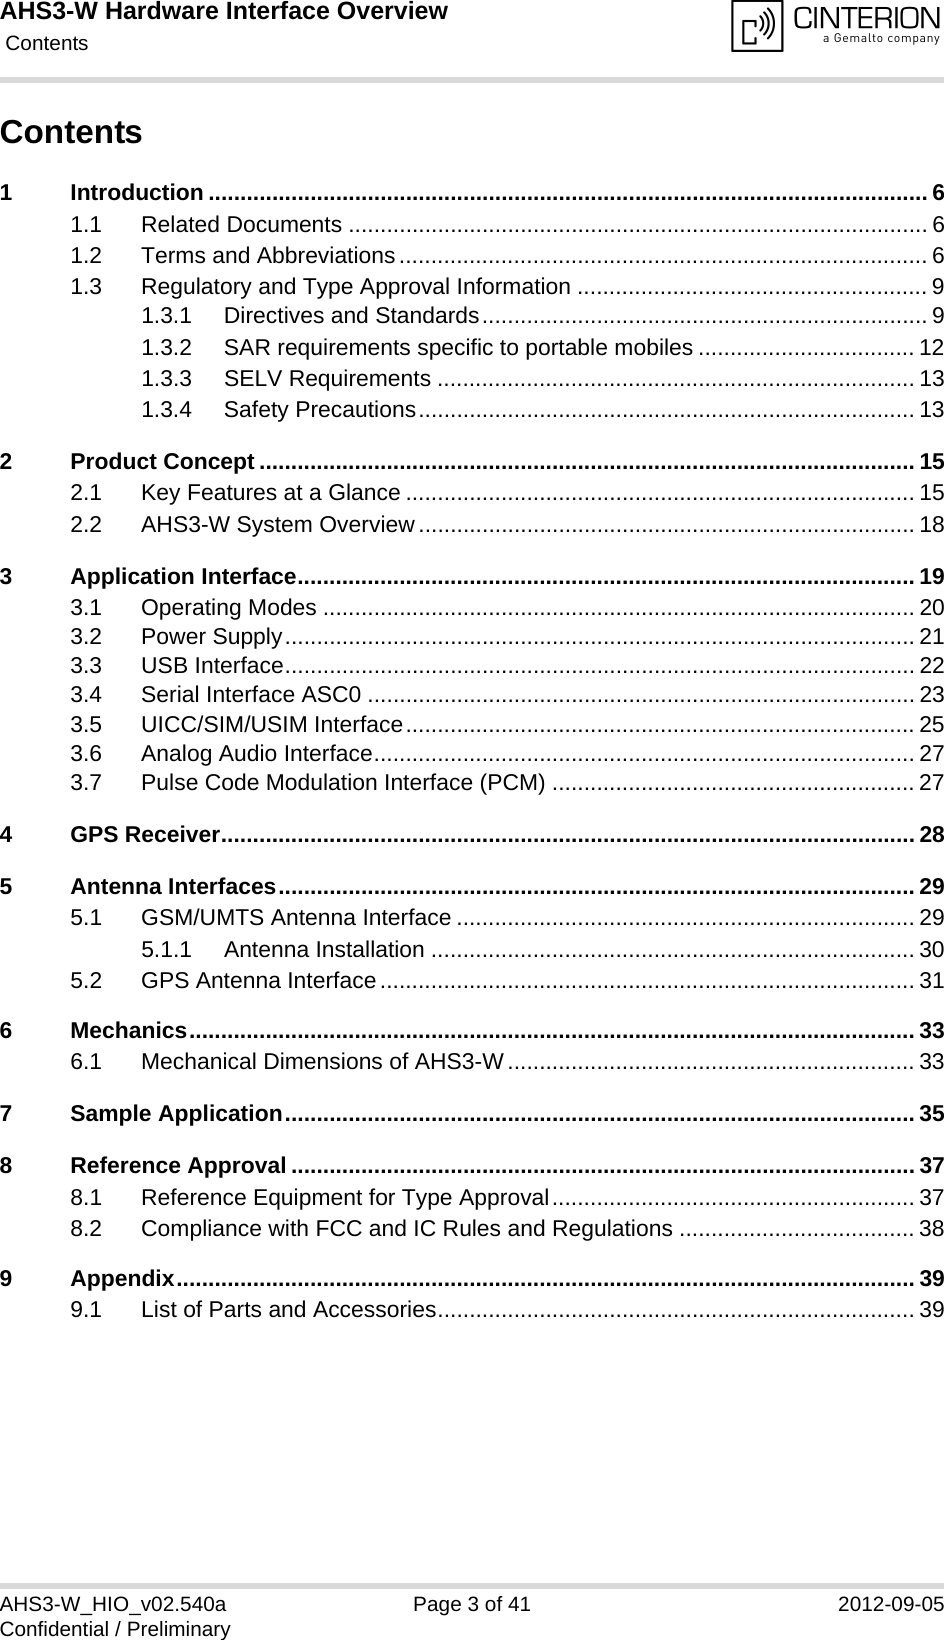 AHS3-W Hardware Interface Overview Contents40AHS3-W_HIO_v02.540a Page 3 of 41 2012-09-05Confidential / PreliminaryContents1 Introduction ................................................................................................................. 61.1 Related Documents ........................................................................................... 61.2 Terms and Abbreviations................................................................................... 61.3 Regulatory and Type Approval Information ....................................................... 91.3.1 Directives and Standards...................................................................... 91.3.2 SAR requirements specific to portable mobiles .................................. 121.3.3 SELV Requirements ........................................................................... 131.3.4 Safety Precautions.............................................................................. 132 Product Concept ....................................................................................................... 152.1 Key Features at a Glance ................................................................................ 152.2 AHS3-W System Overview .............................................................................. 183 Application Interface................................................................................................. 193.1 Operating Modes ............................................................................................. 203.2 Power Supply................................................................................................... 213.3 USB Interface................................................................................................... 223.4 Serial Interface ASC0 ...................................................................................... 233.5 UICC/SIM/USIM Interface................................................................................ 253.6 Analog Audio Interface..................................................................................... 273.7 Pulse Code Modulation Interface (PCM) ......................................................... 274 GPS Receiver............................................................................................................. 285 Antenna Interfaces.................................................................................................... 295.1 GSM/UMTS Antenna Interface ........................................................................ 295.1.1 Antenna Installation ............................................................................ 305.2 GPS Antenna Interface.................................................................................... 316 Mechanics.................................................................................................................. 336.1 Mechanical Dimensions of AHS3-W................................................................ 337 Sample Application................................................................................................... 358 Reference Approval .................................................................................................. 378.1 Reference Equipment for Type Approval......................................................... 378.2 Compliance with FCC and IC Rules and Regulations ..................................... 389 Appendix.................................................................................................................... 399.1 List of Parts and Accessories........................................................................... 39